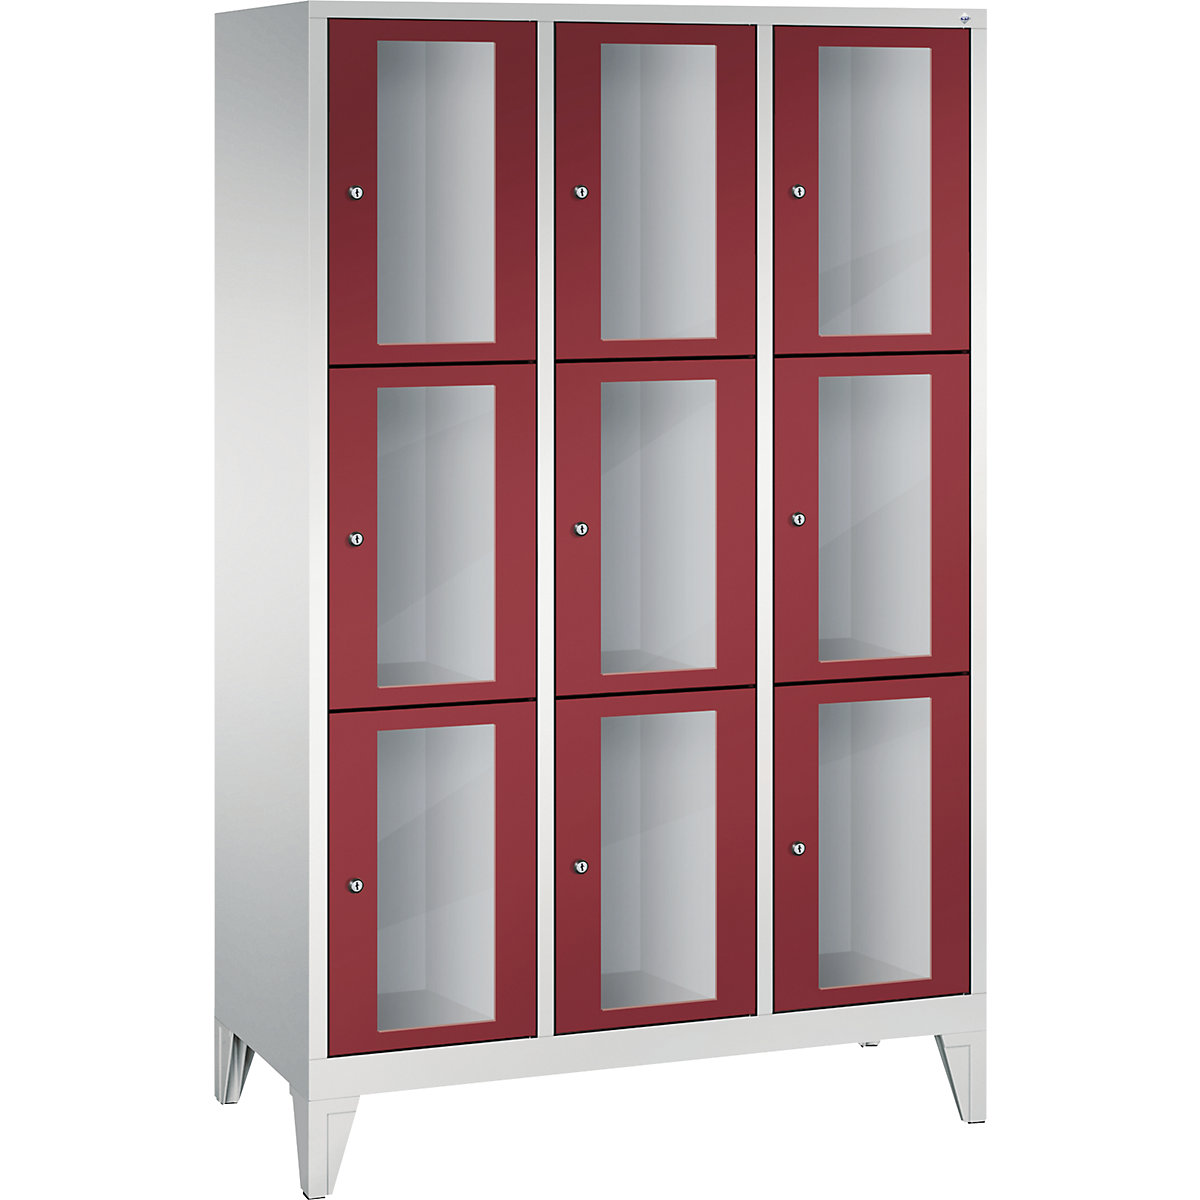 CLASSIC locker unit, compartment height 510 mm, with feet – C+P